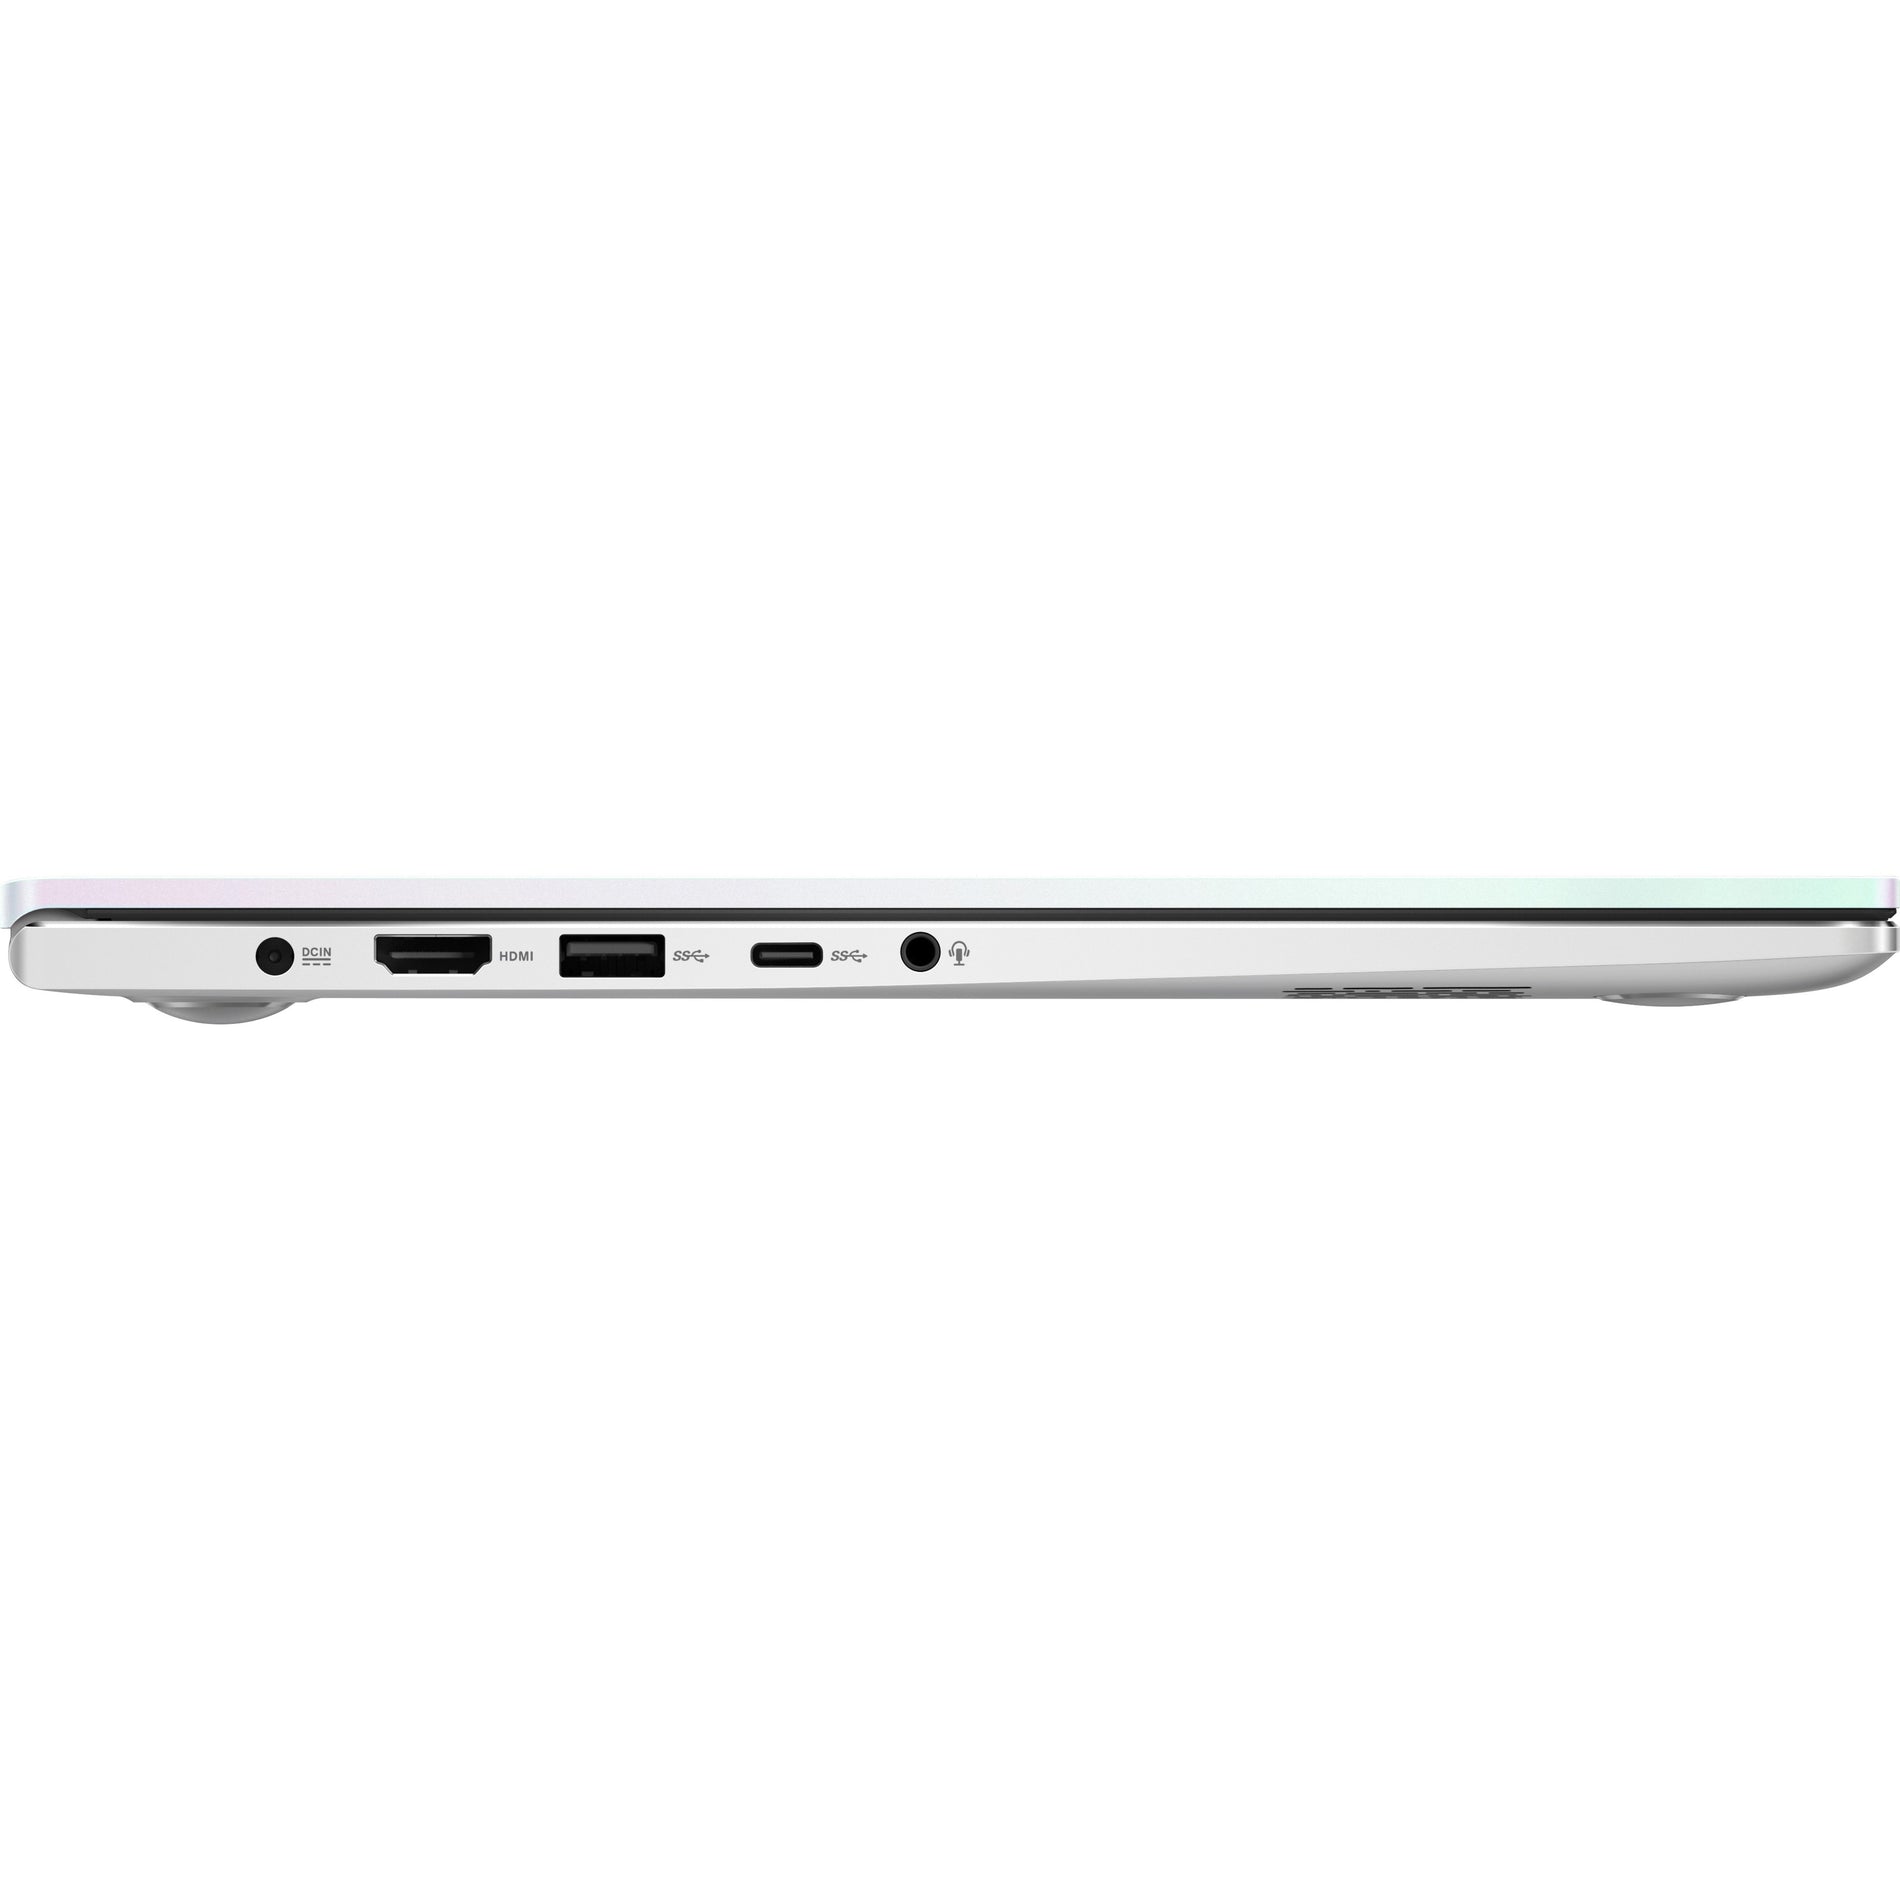 Asus VivoBook S15 S533 S533EA-DH74-WH 15.6 Notebook - Full HD